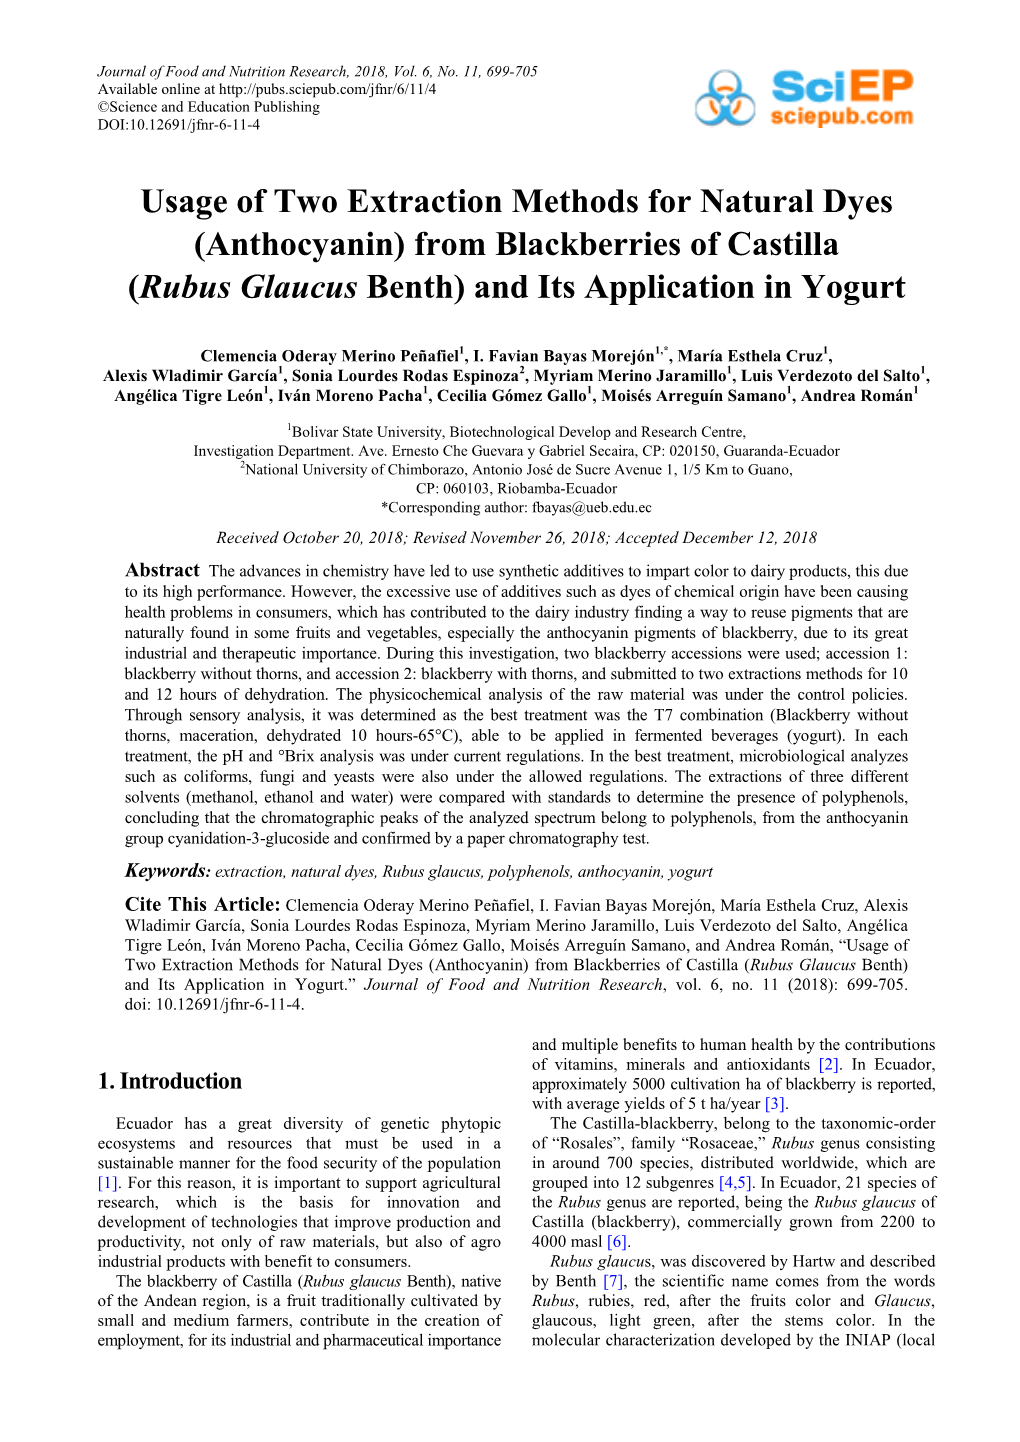 Usage of Two Extraction Methods for Natural Dyes (Anthocyanin) from Blackberries of Castilla (Rubus Glaucus Benth) and Its Application in Yogurt